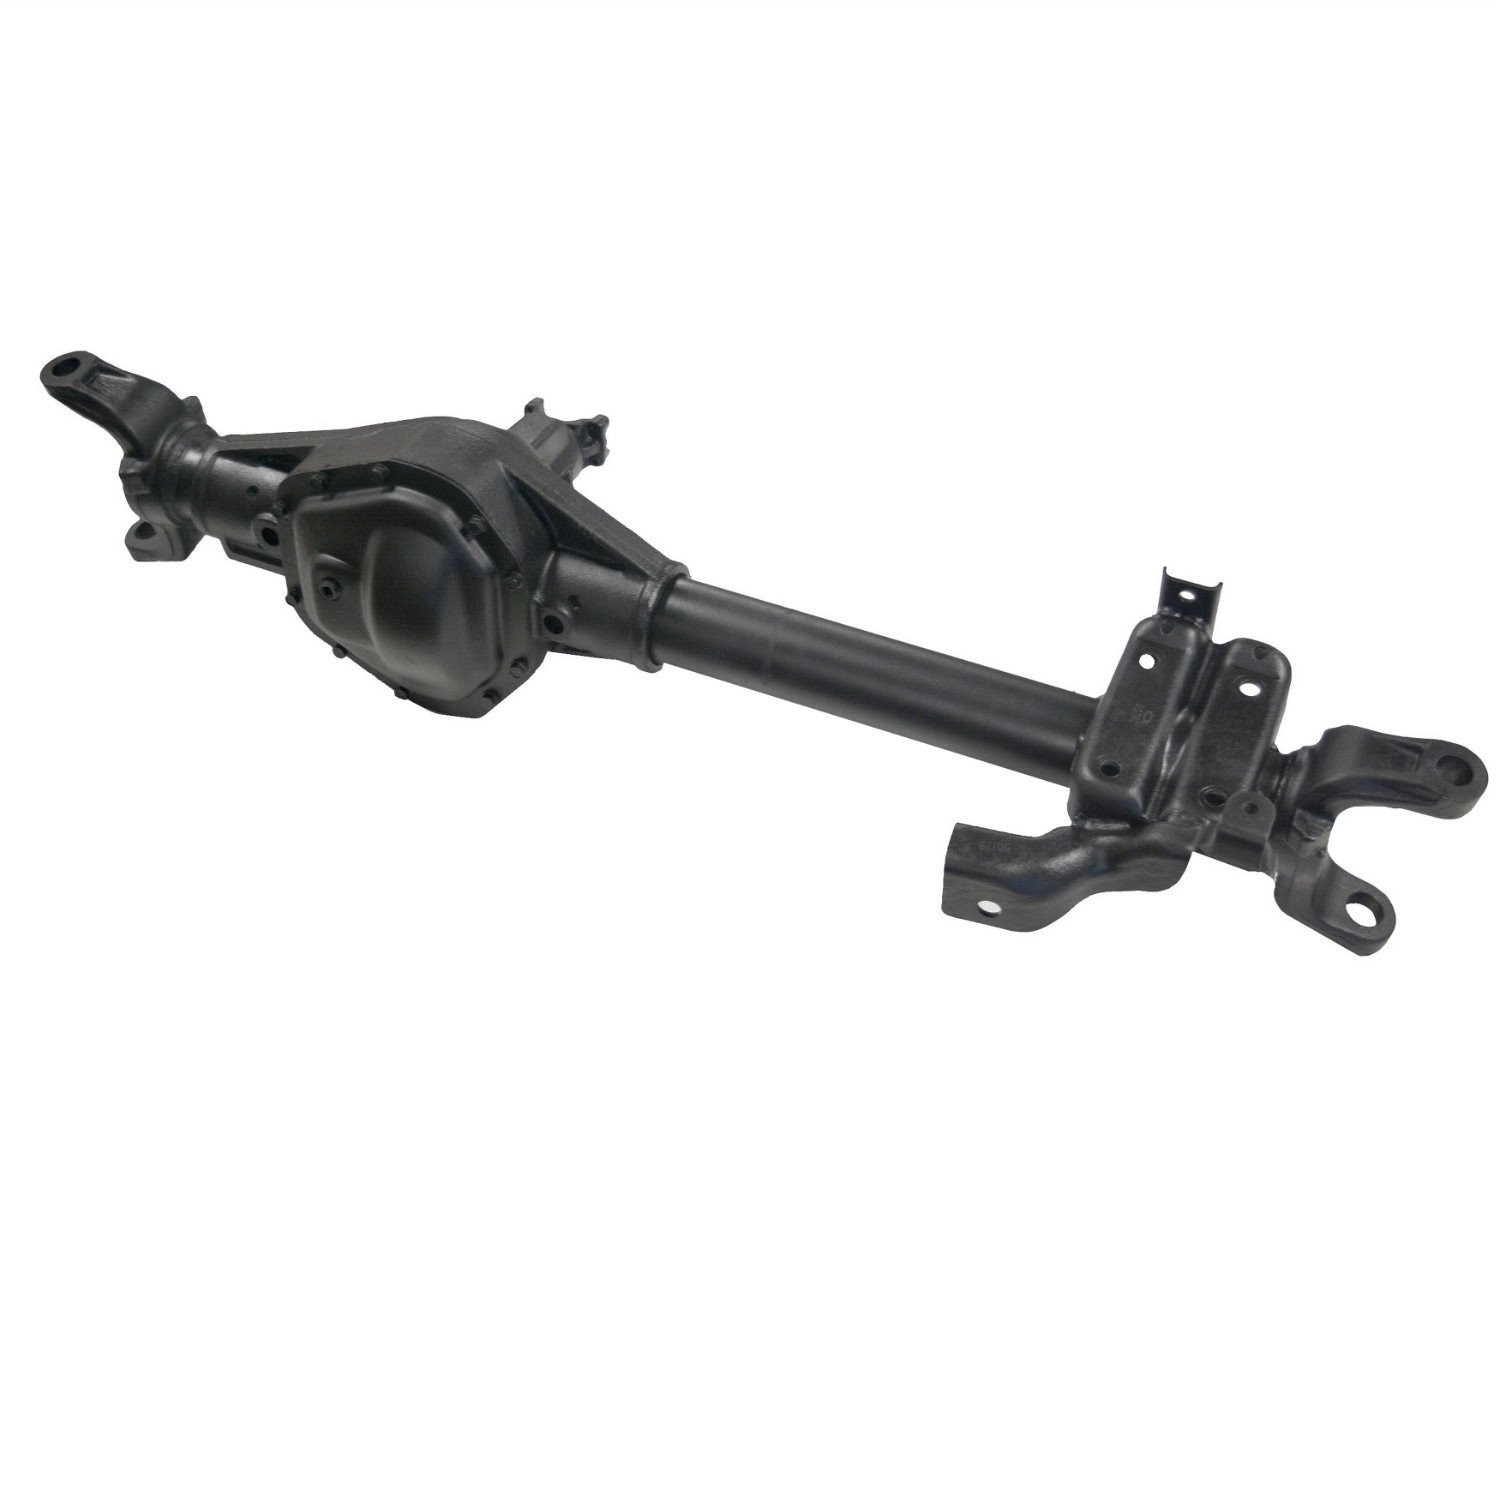 Remanufactured Complete Axle Assembly for Dana 50 99-00 F250 & F350, 4.30 , SRW, Rear ABS